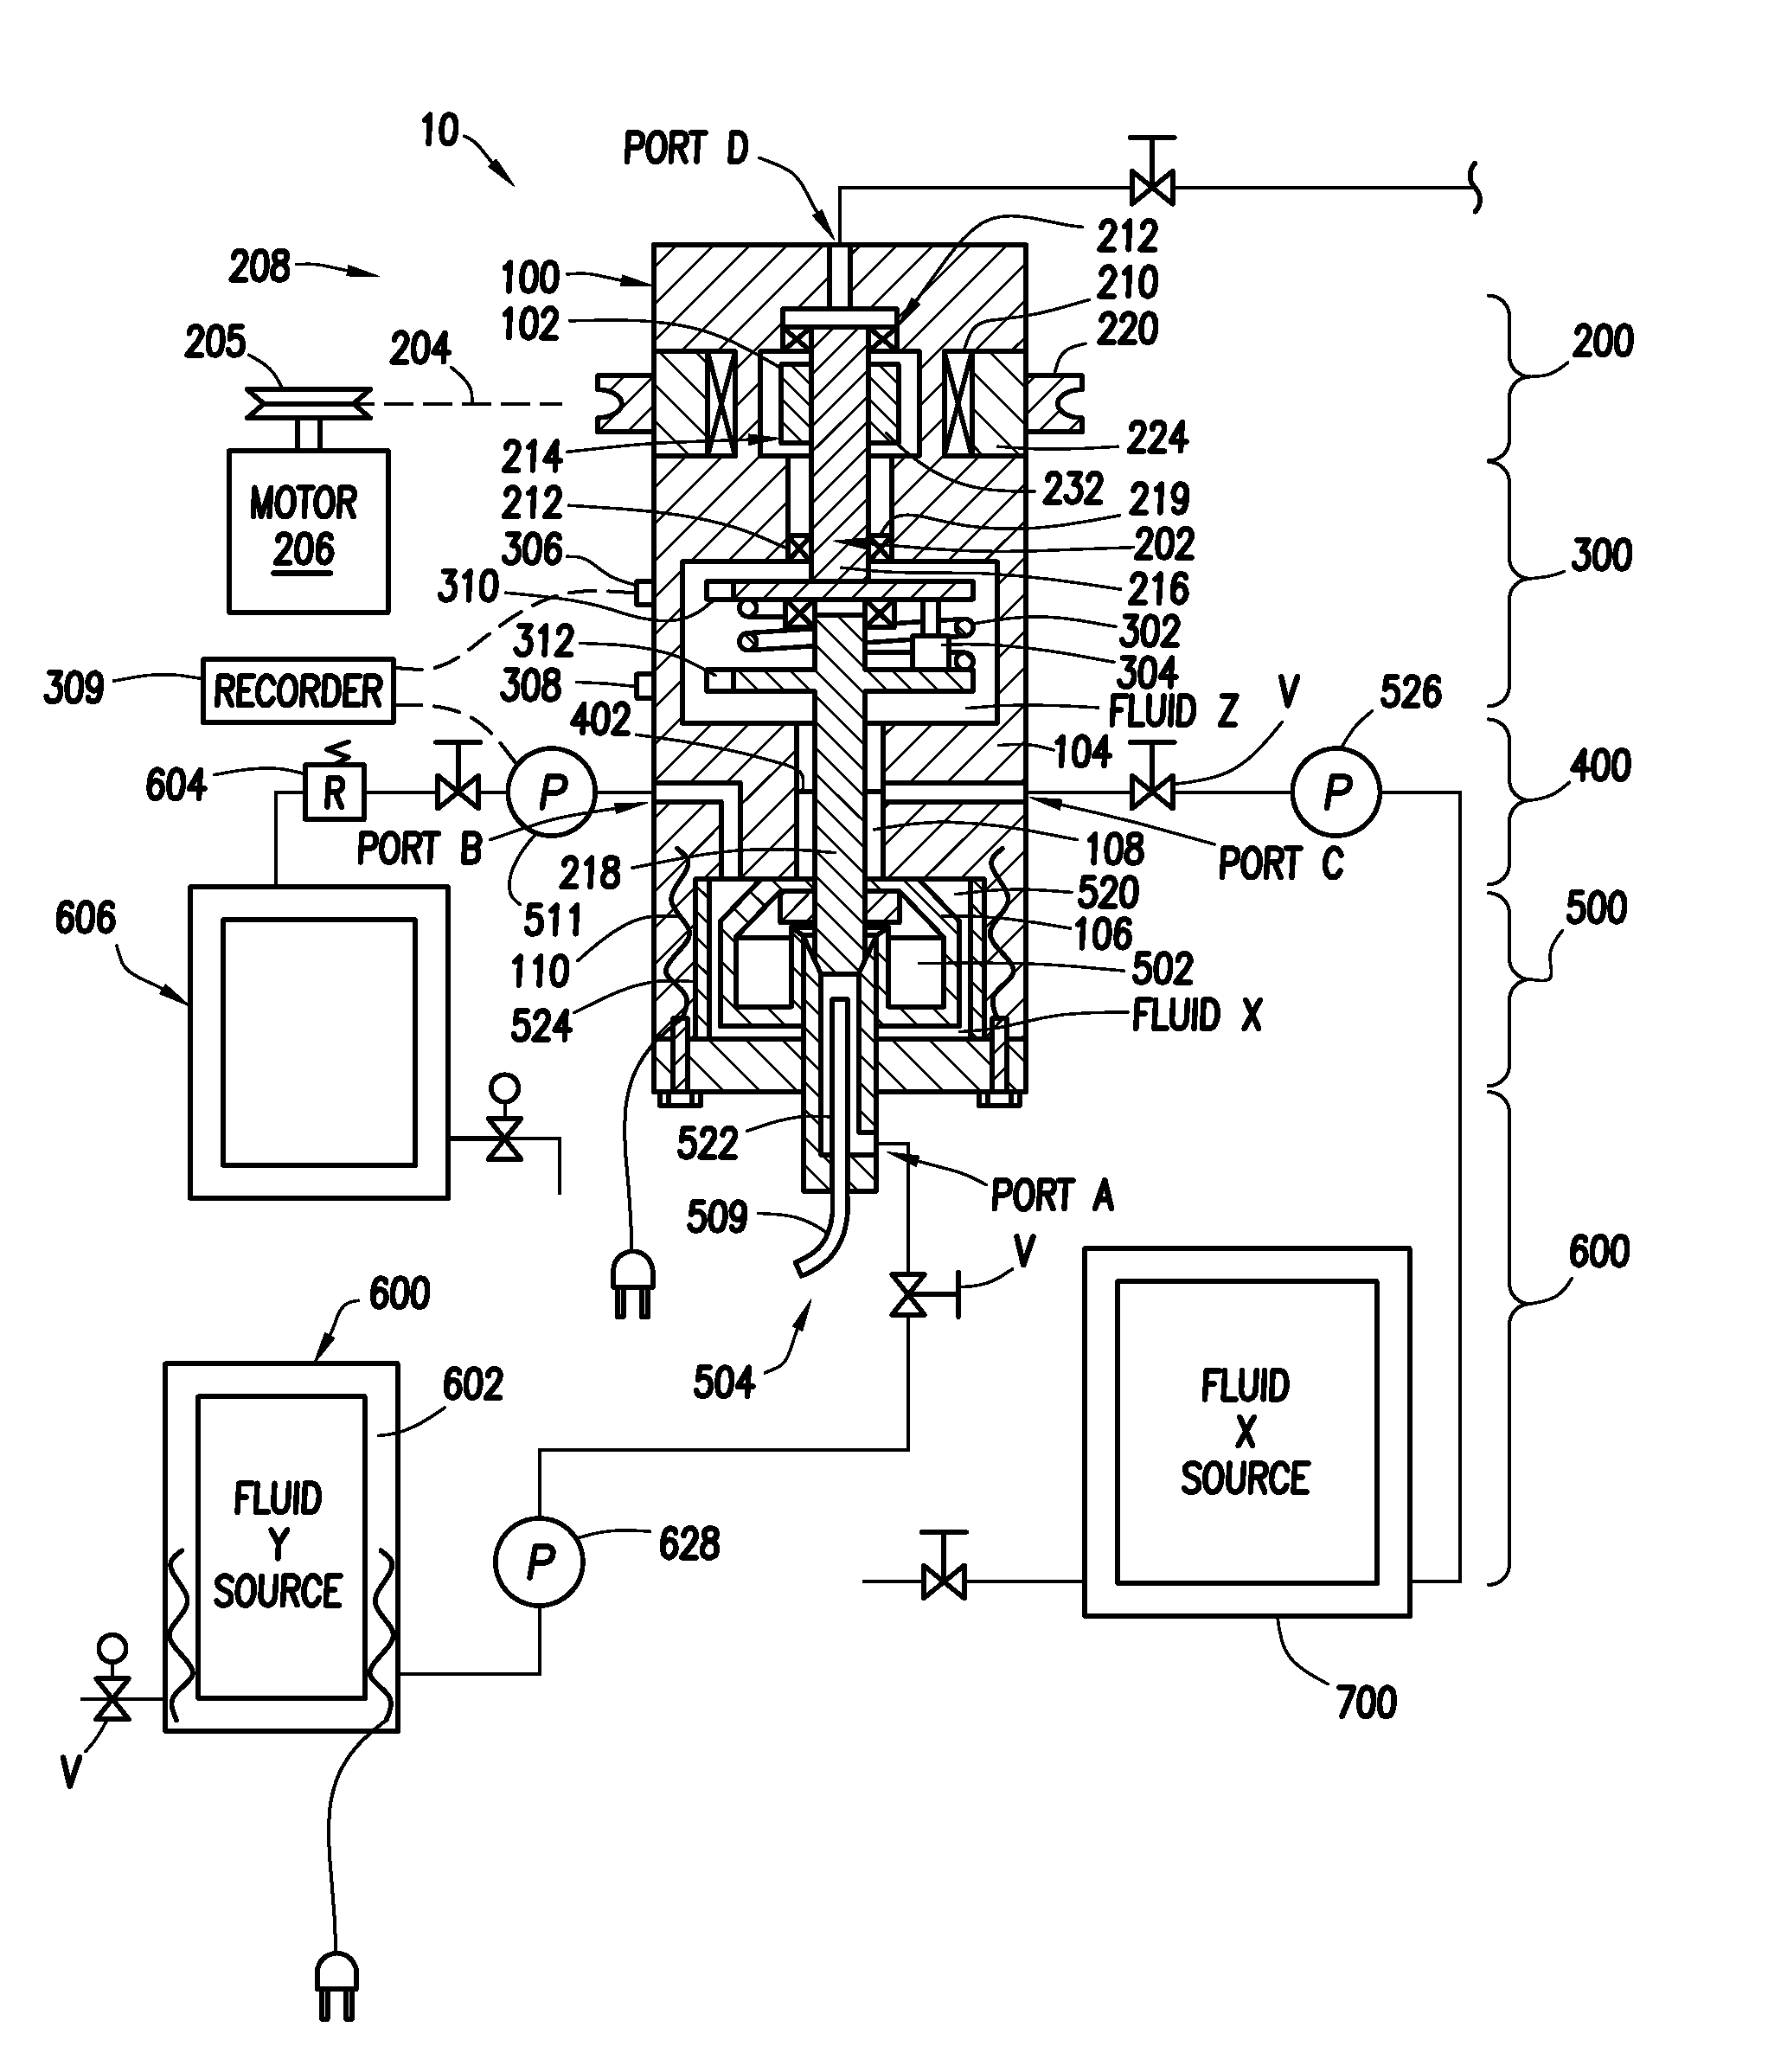 Apparatus and methods for continuous compatibility testing of subterranean fluids and their compositions under wellbore conditions